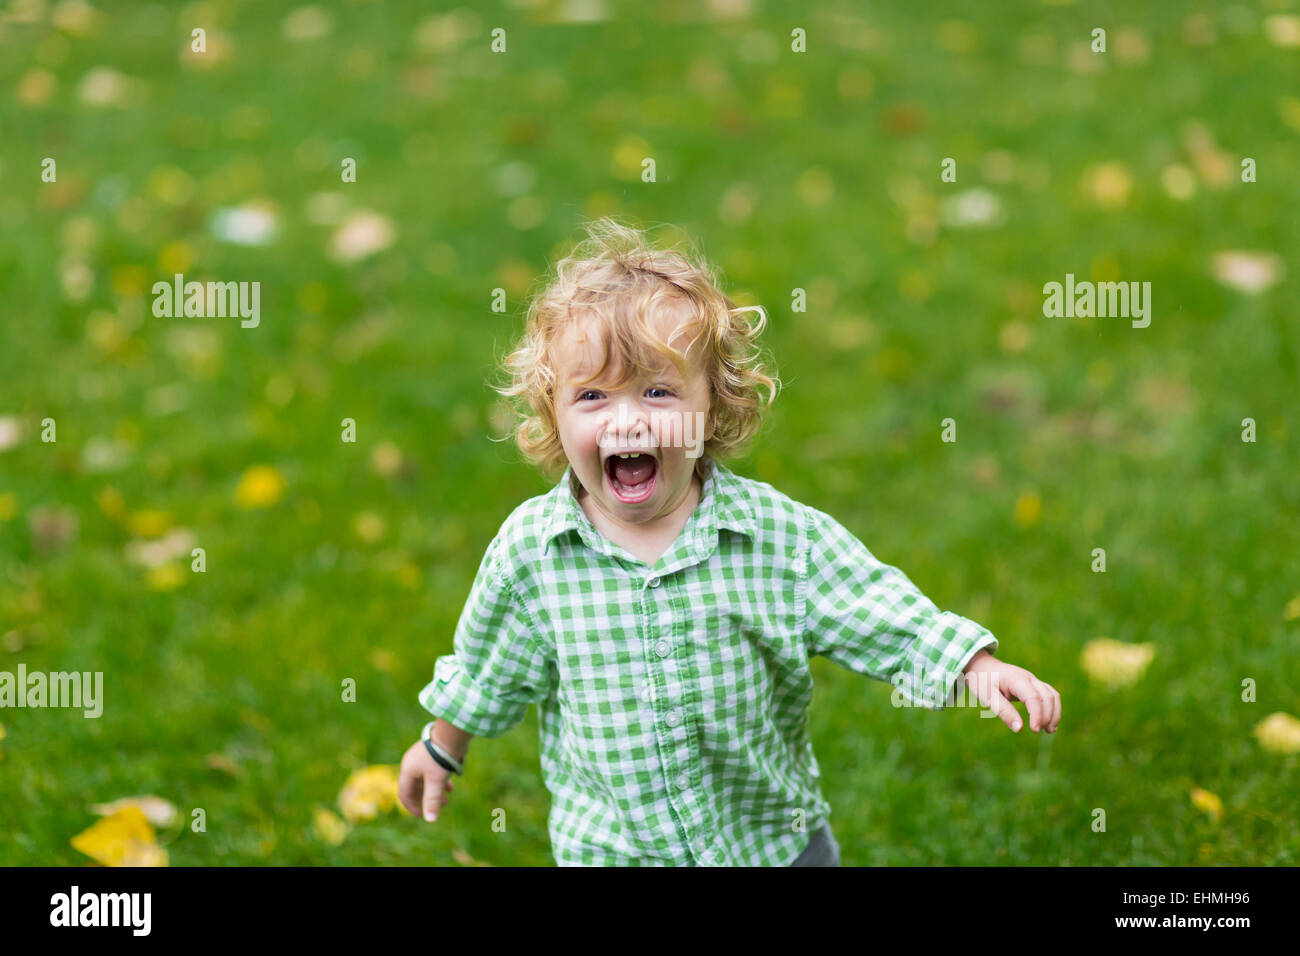 Caucasian boy laughing in field Stock Photo